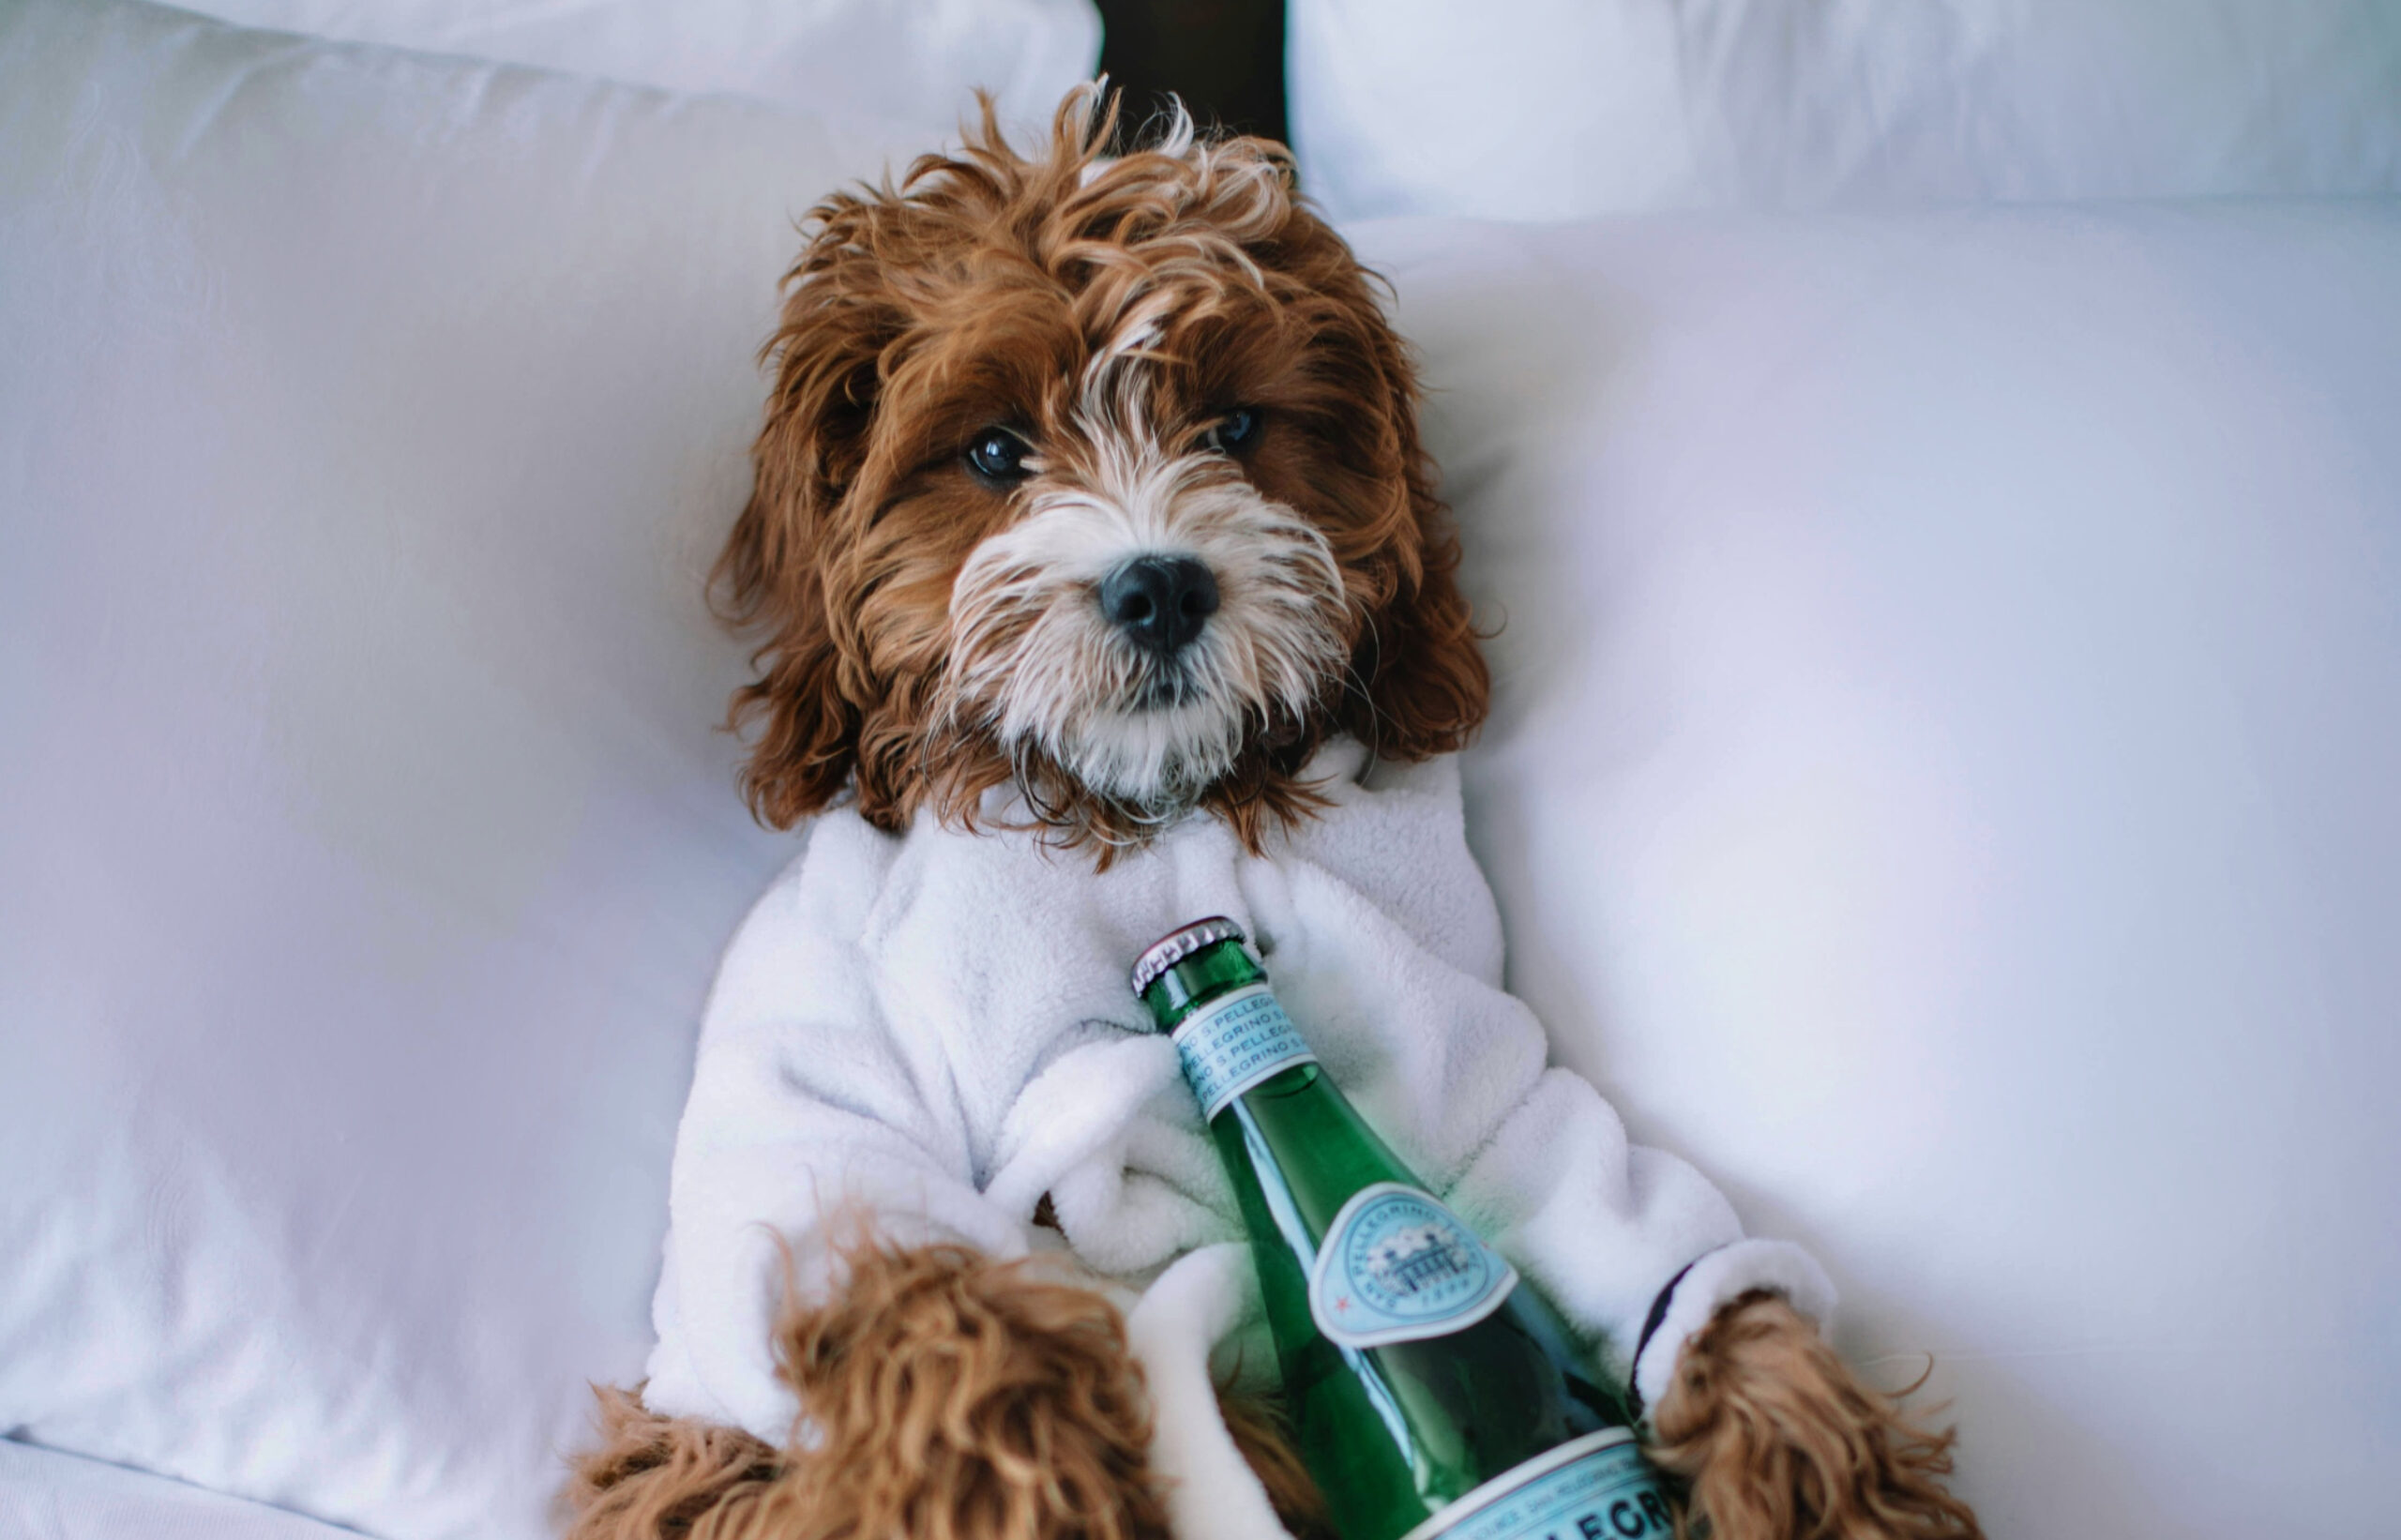 Hotels Are Taking The Biscuit: Holiday Tax On Our Four-Legged Friends